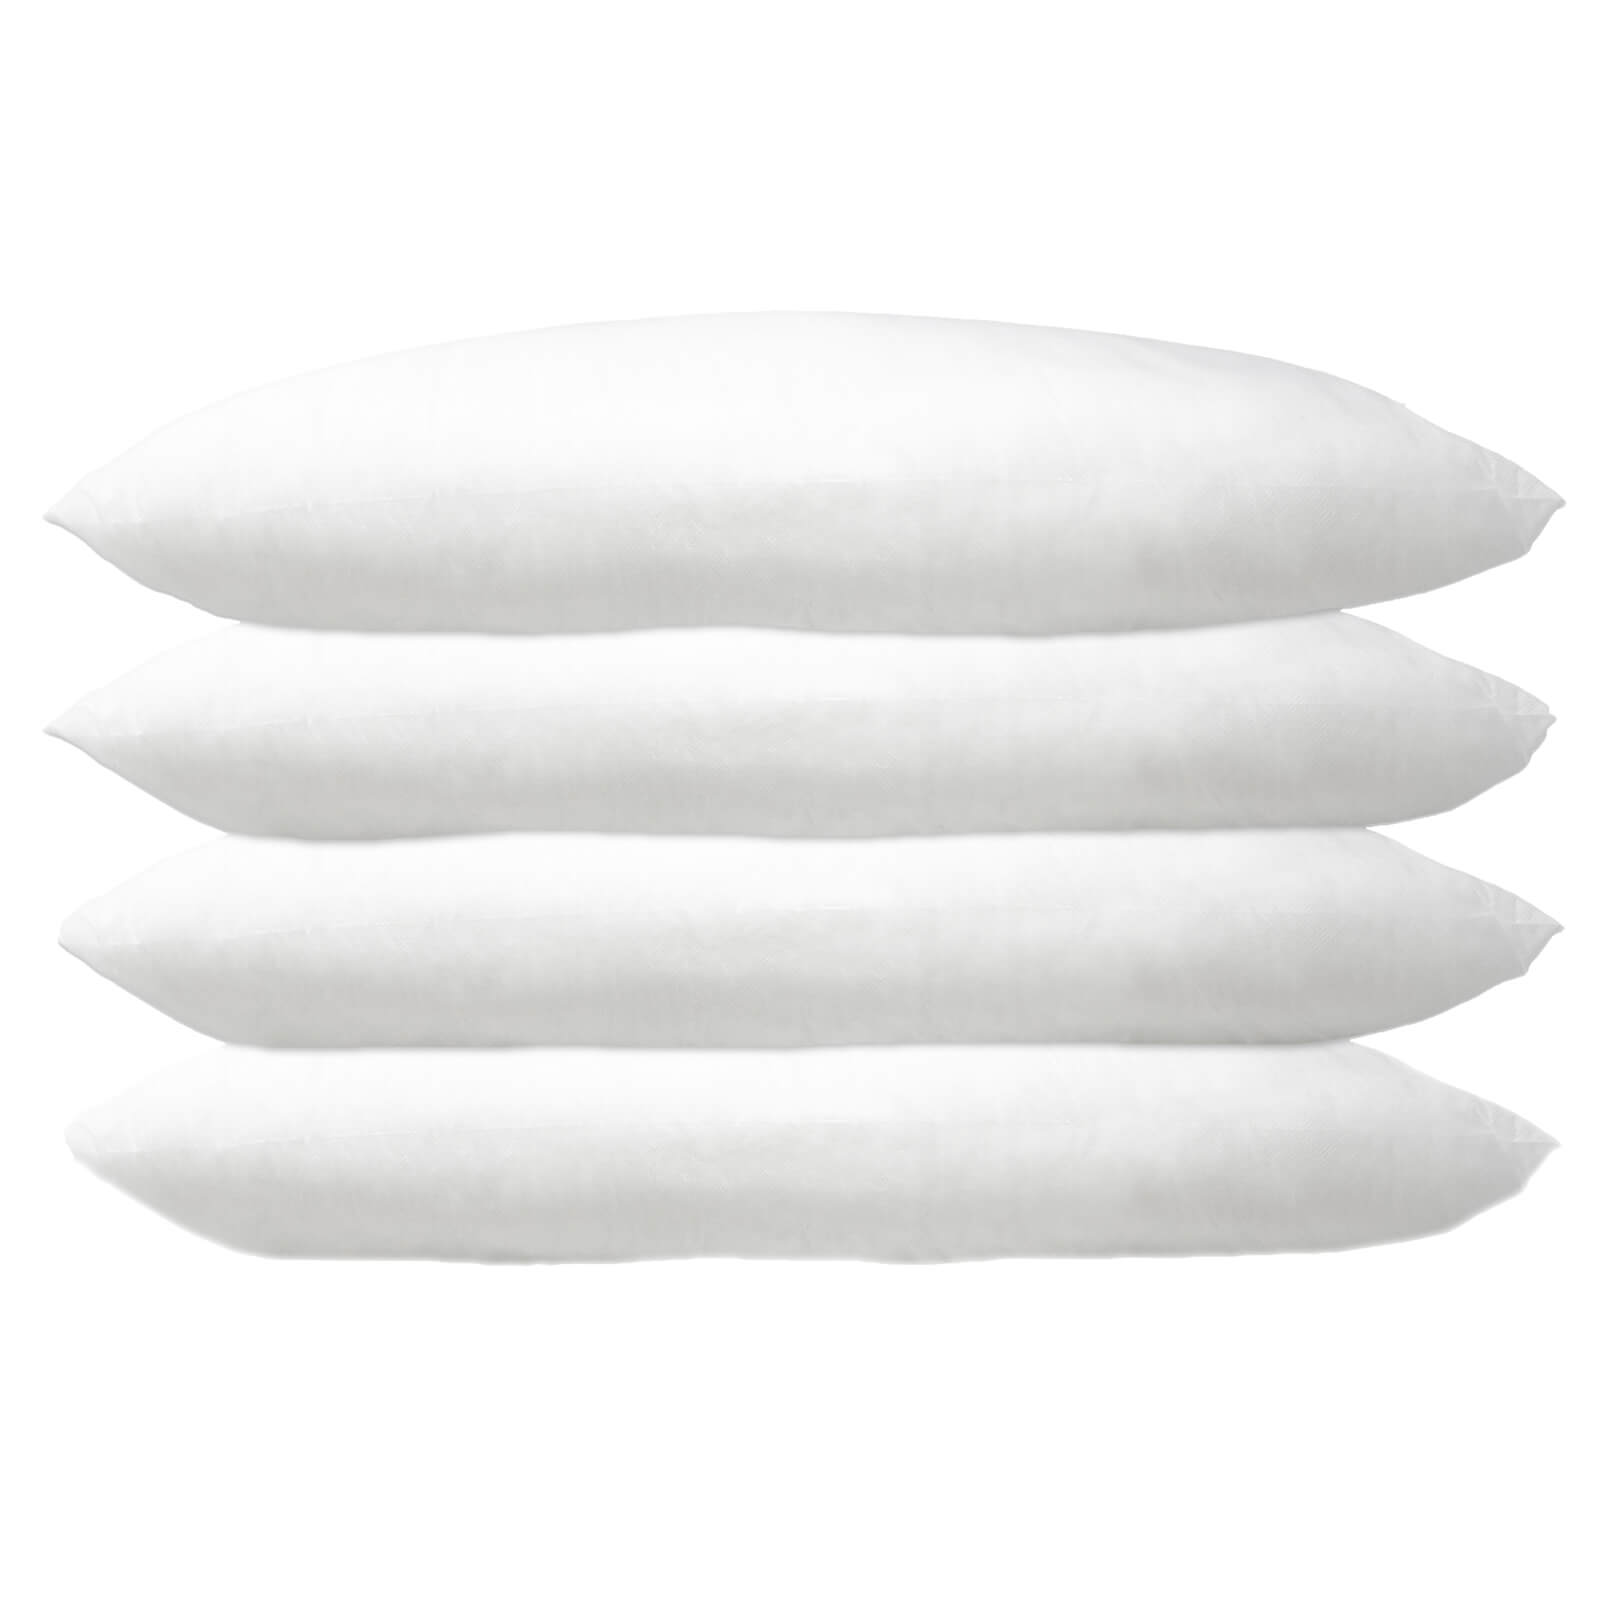 Essentials Pillows - Pack of 4